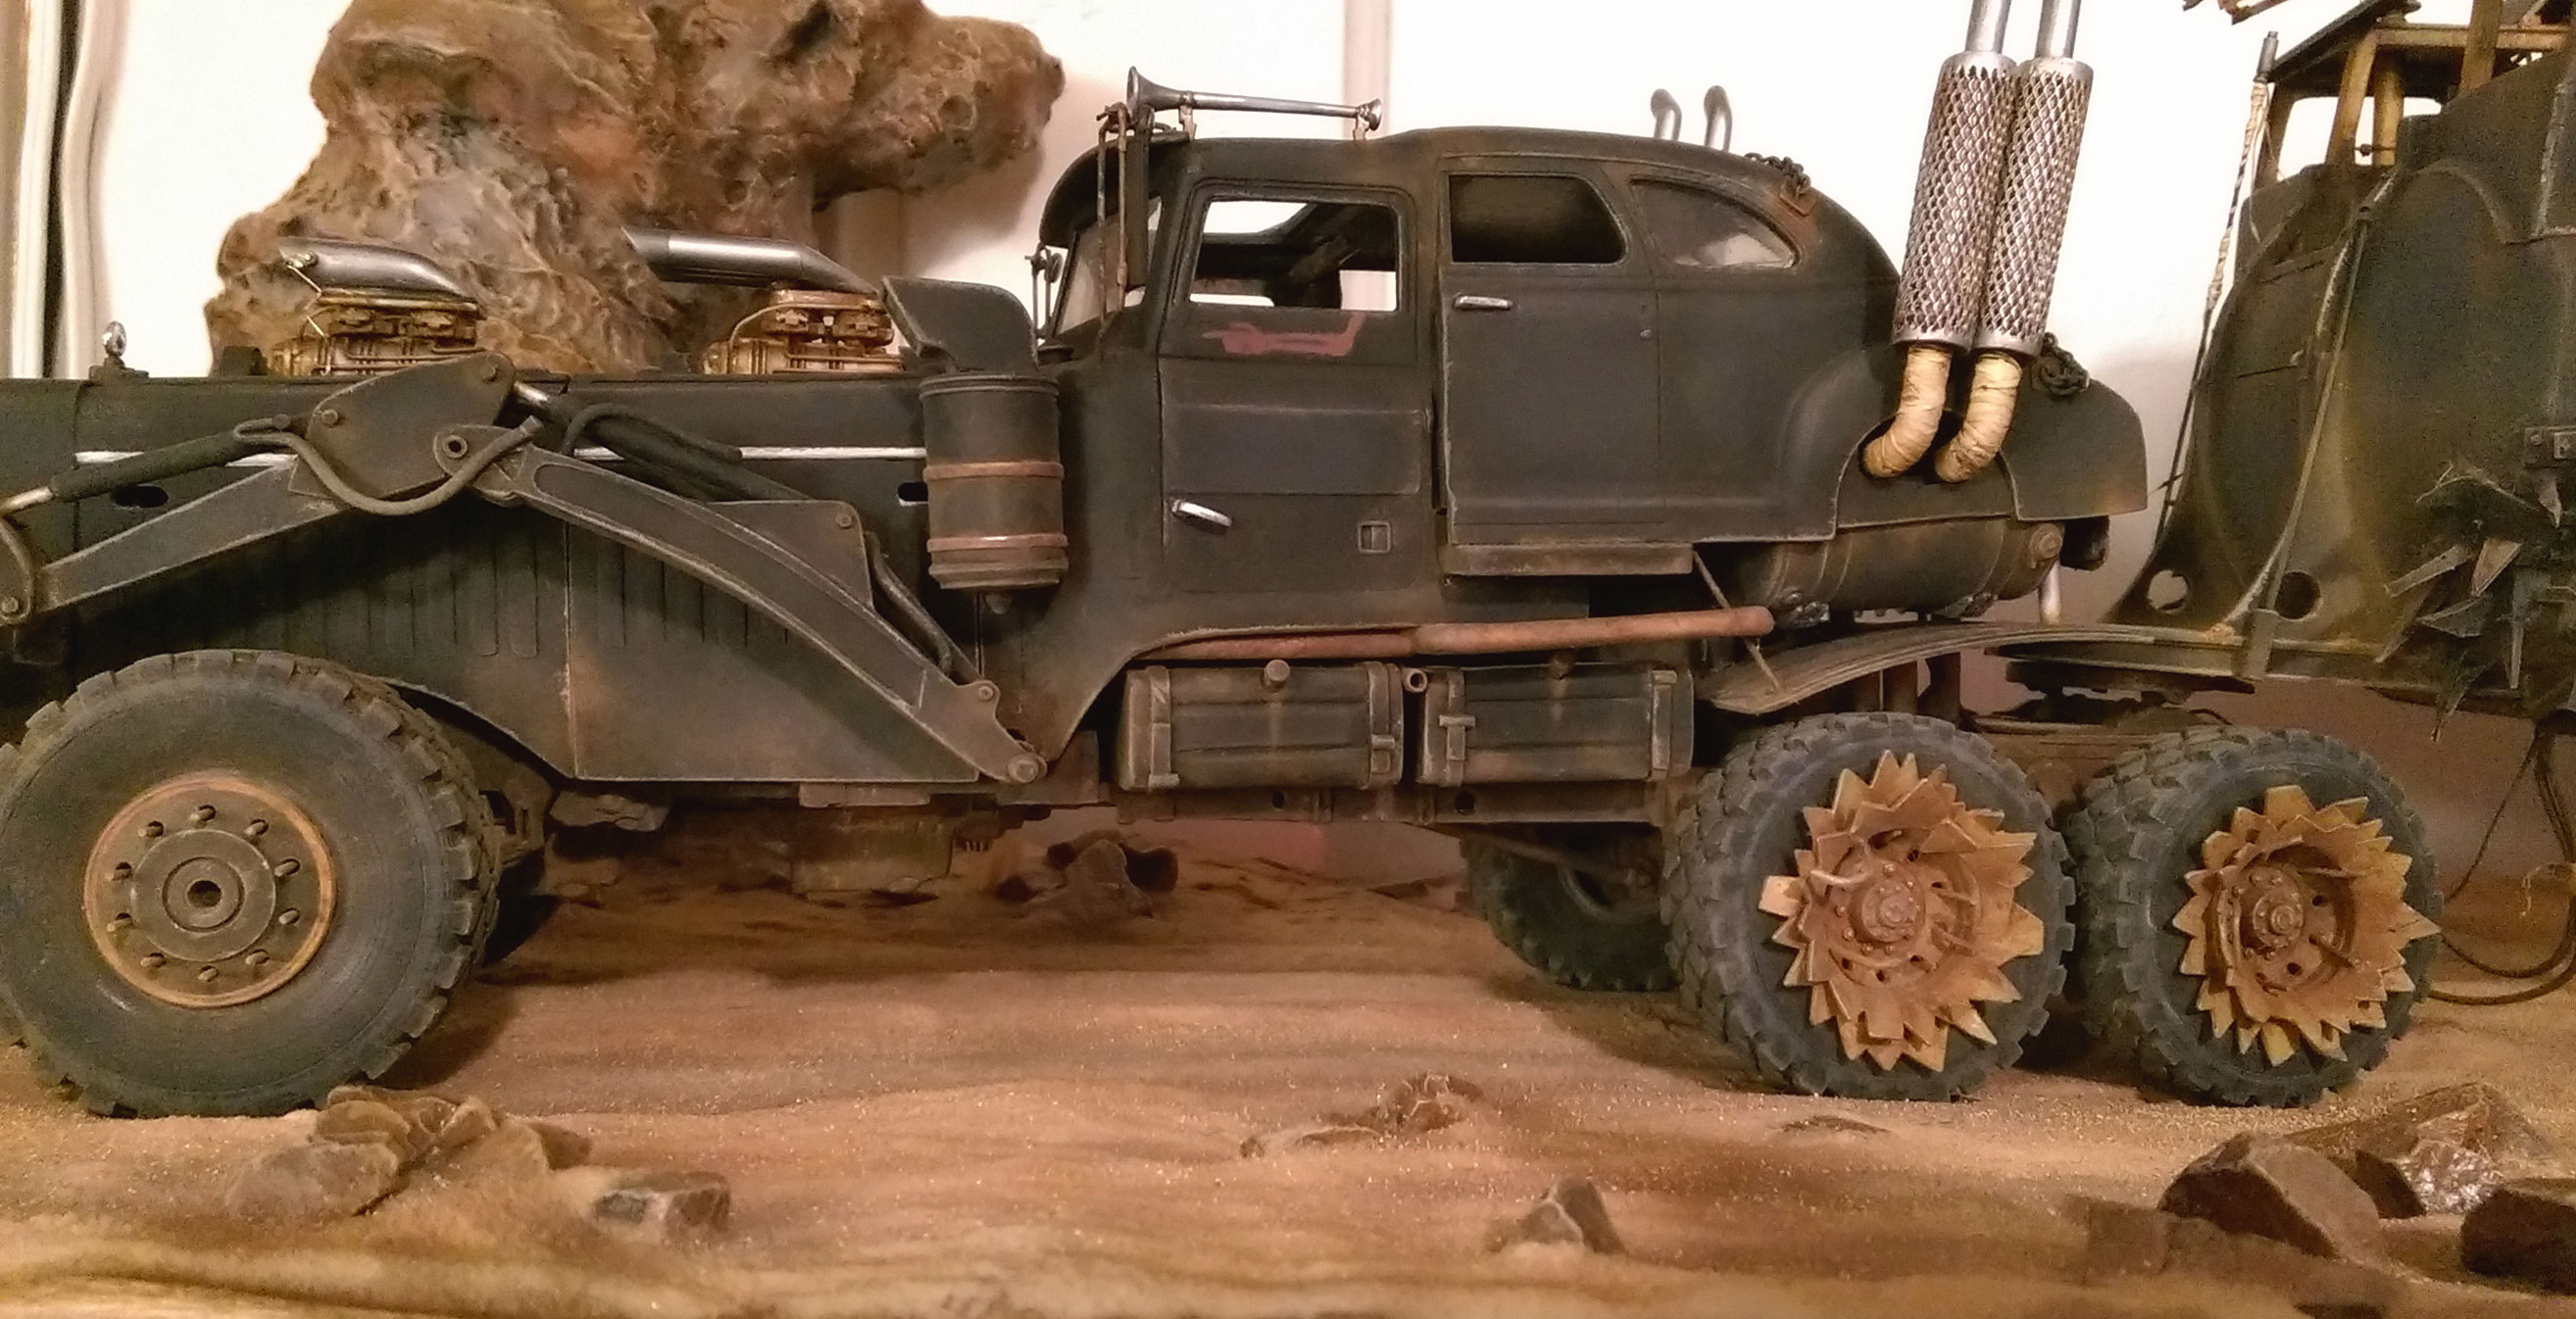 Mad Max Fury Road - The War Rig - 1/25 Scale Kit Bash Build | RPF Costume  and Prop Maker Community